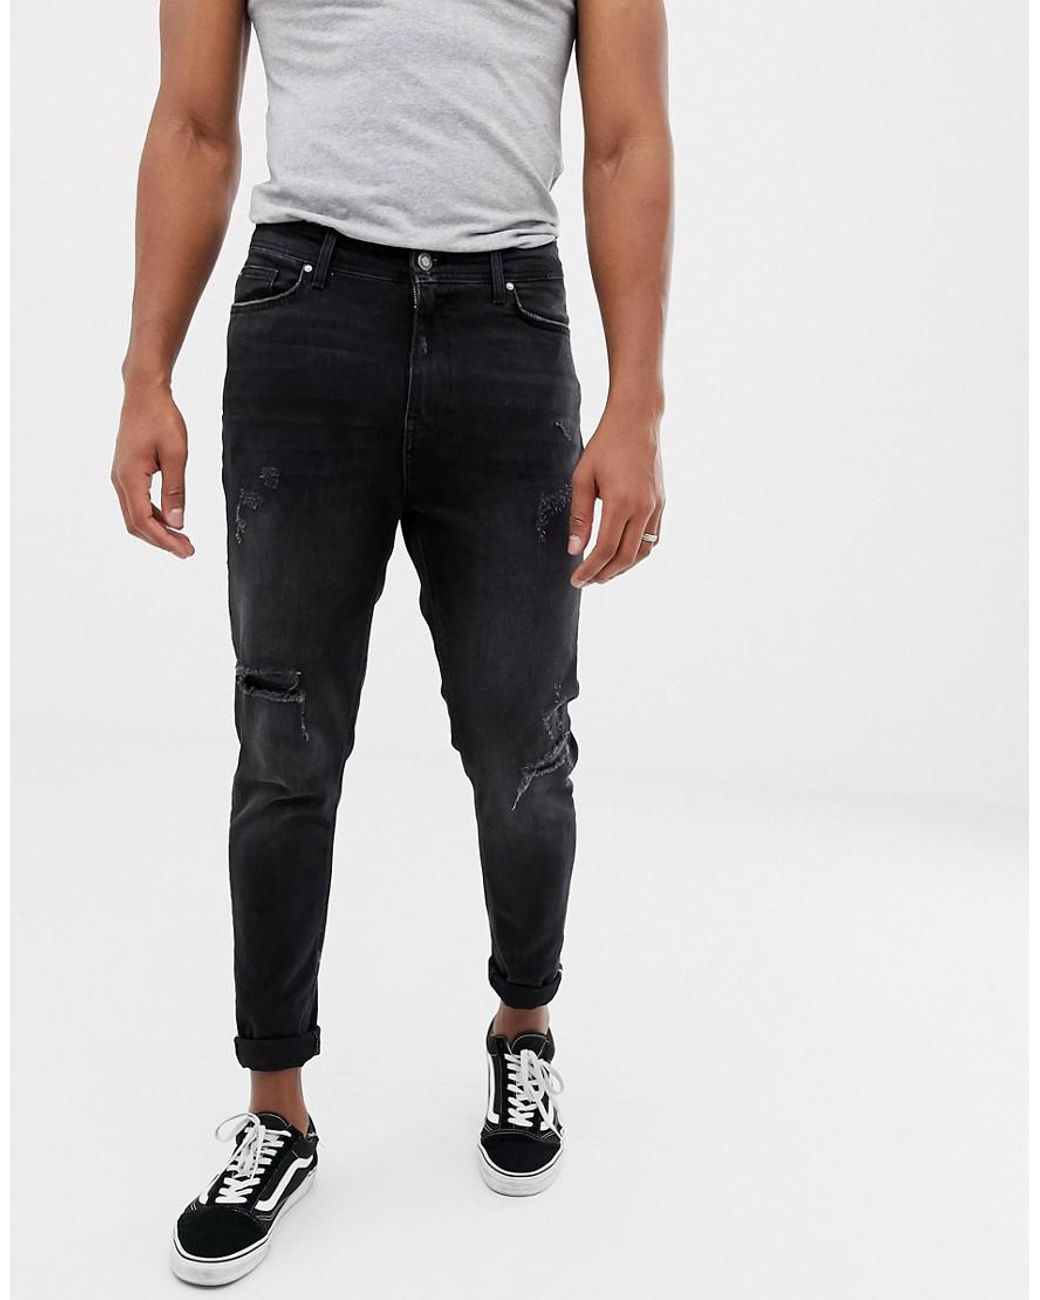 Lyst - Bershka Carrot Fit Jeans In Black With Rips And Hem Taping in ...